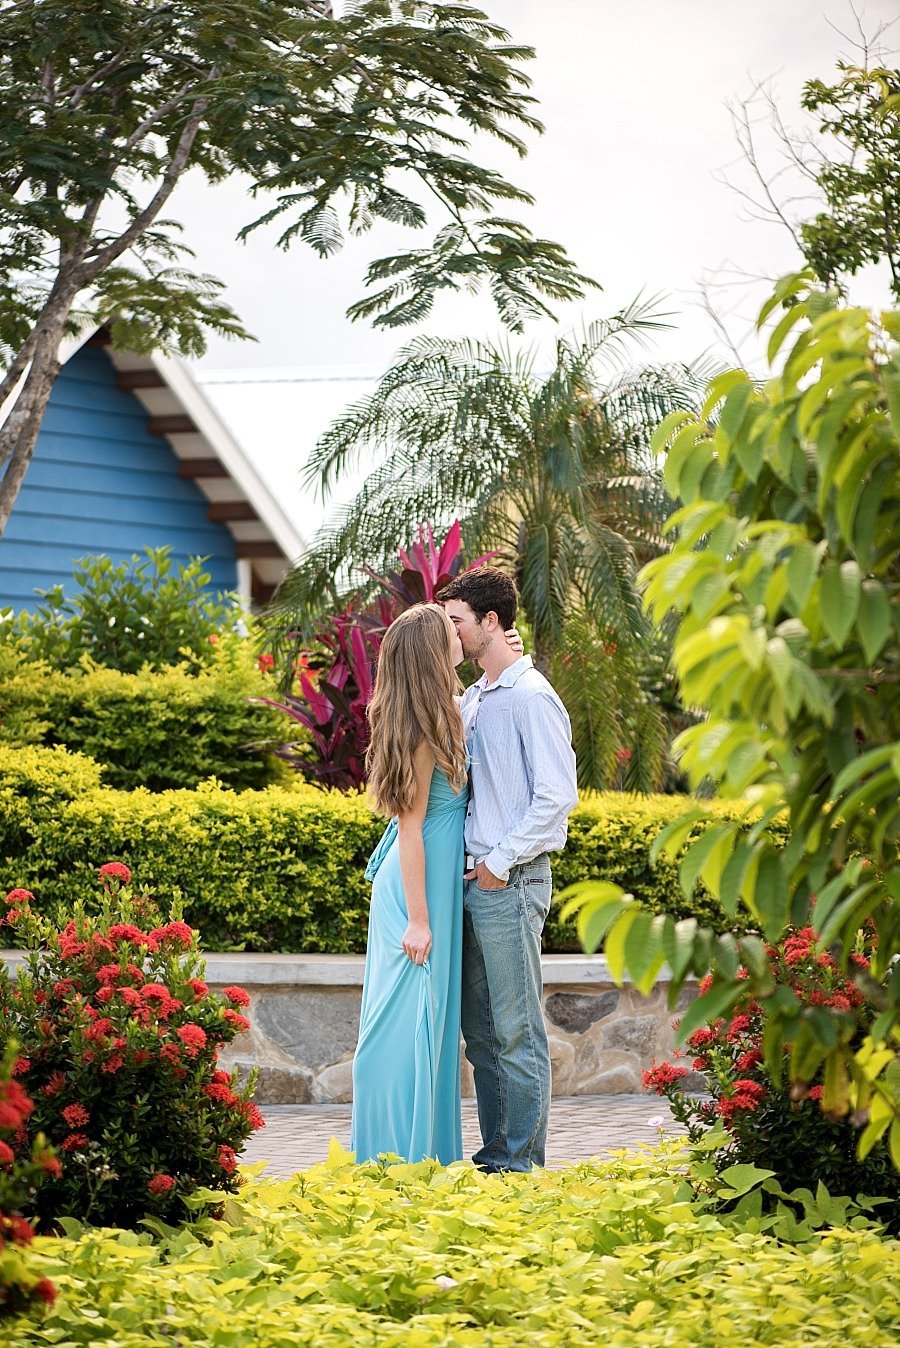 Couple surrounded by tropical plants